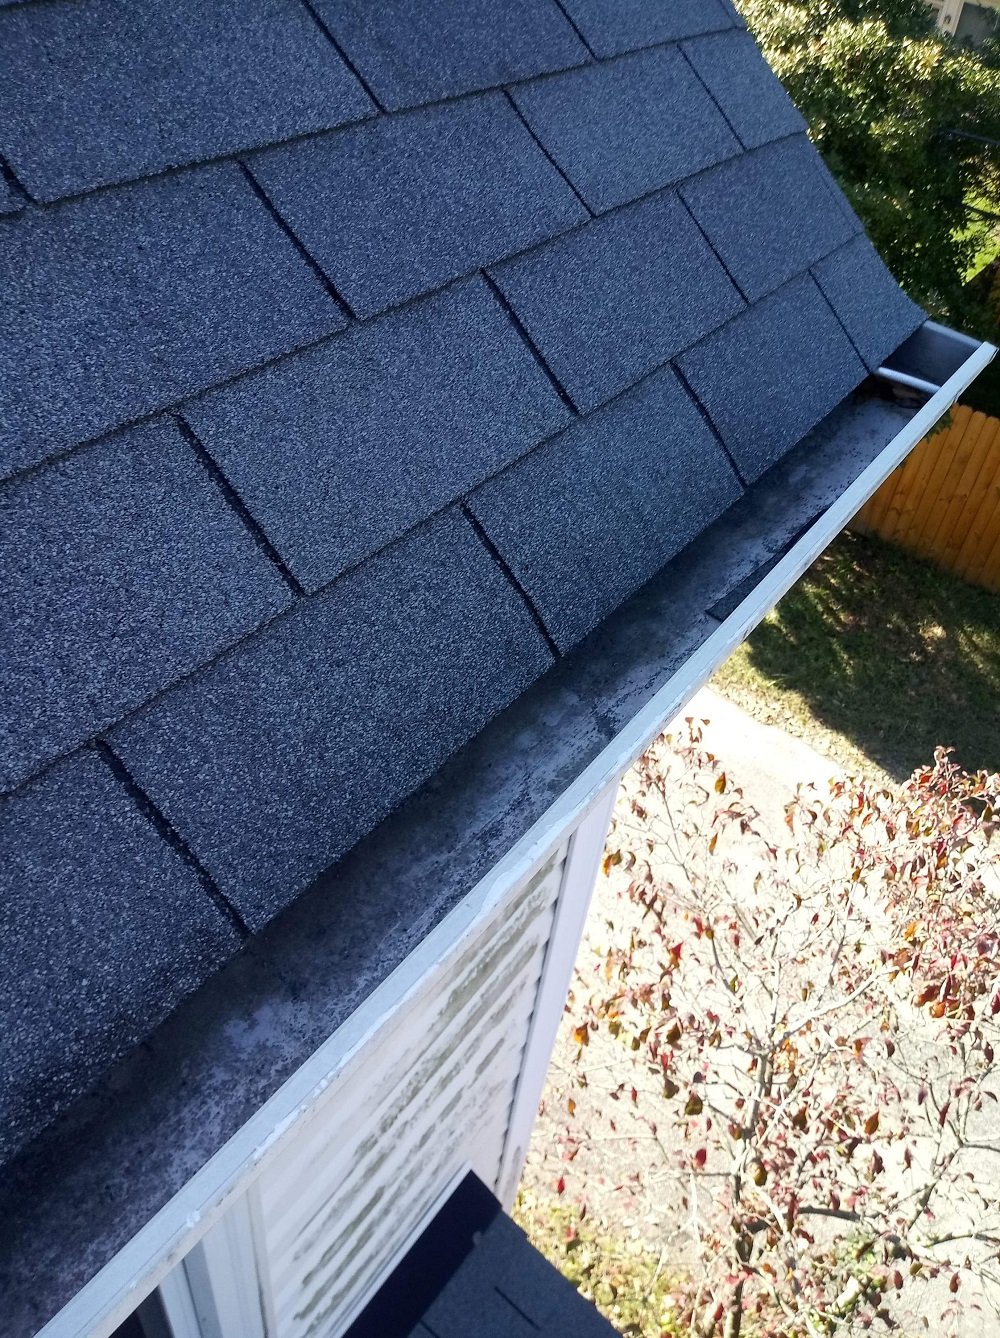 Clean Pro Gutter Cleaning Cleveland cover